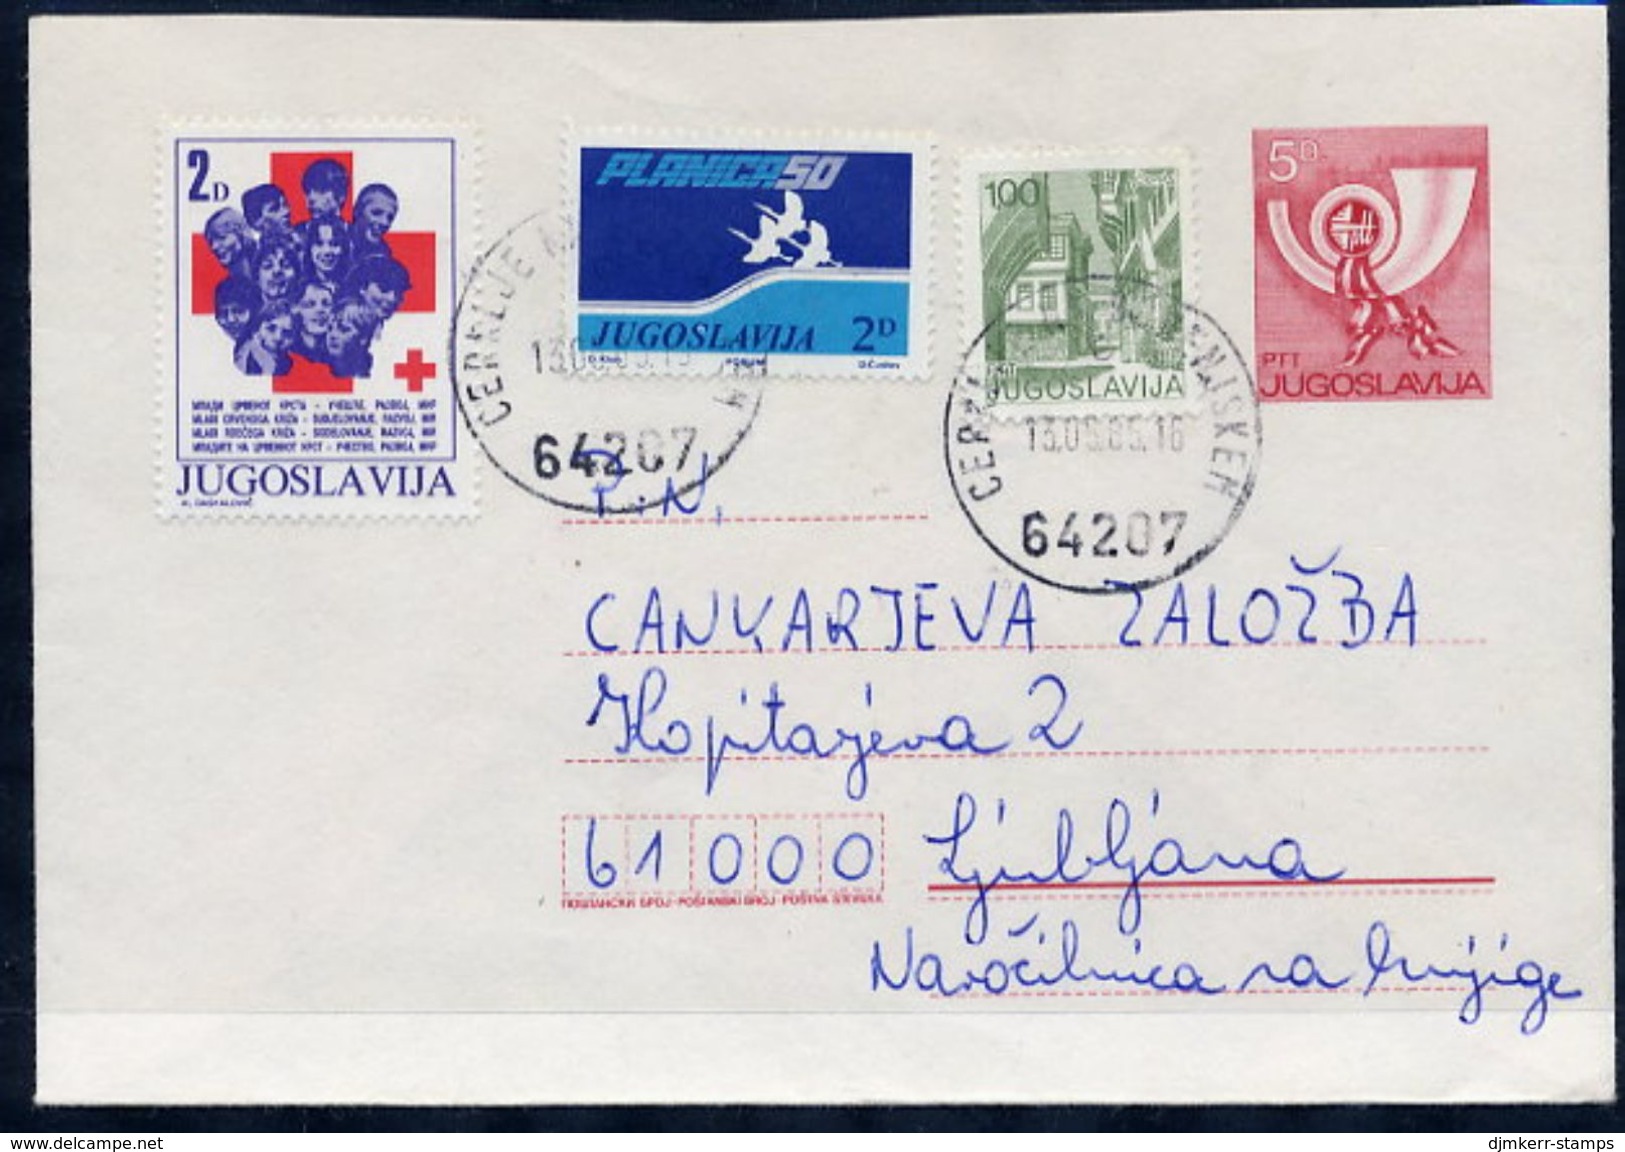 YUGOSLAVIA 1983 Posthorn 5 D.stationery Envelope Used With Additional Franking And Two Tax Stamps  Michel U72 - Enteros Postales